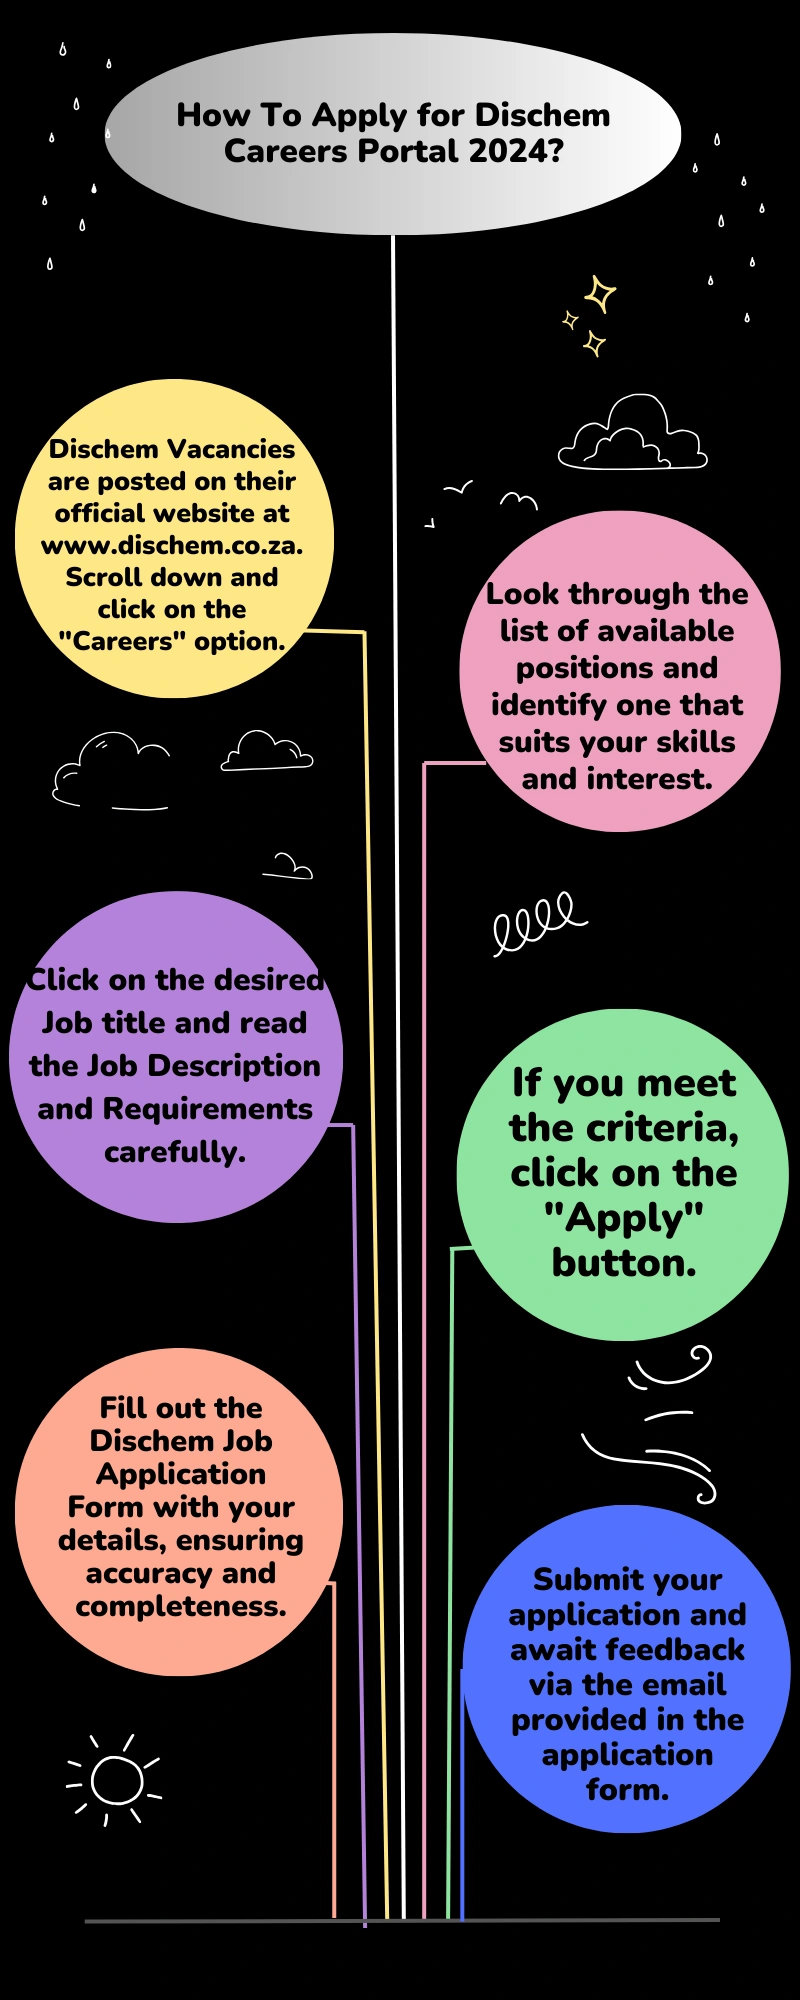 How To Apply for Dischem Careers Portal 2024?